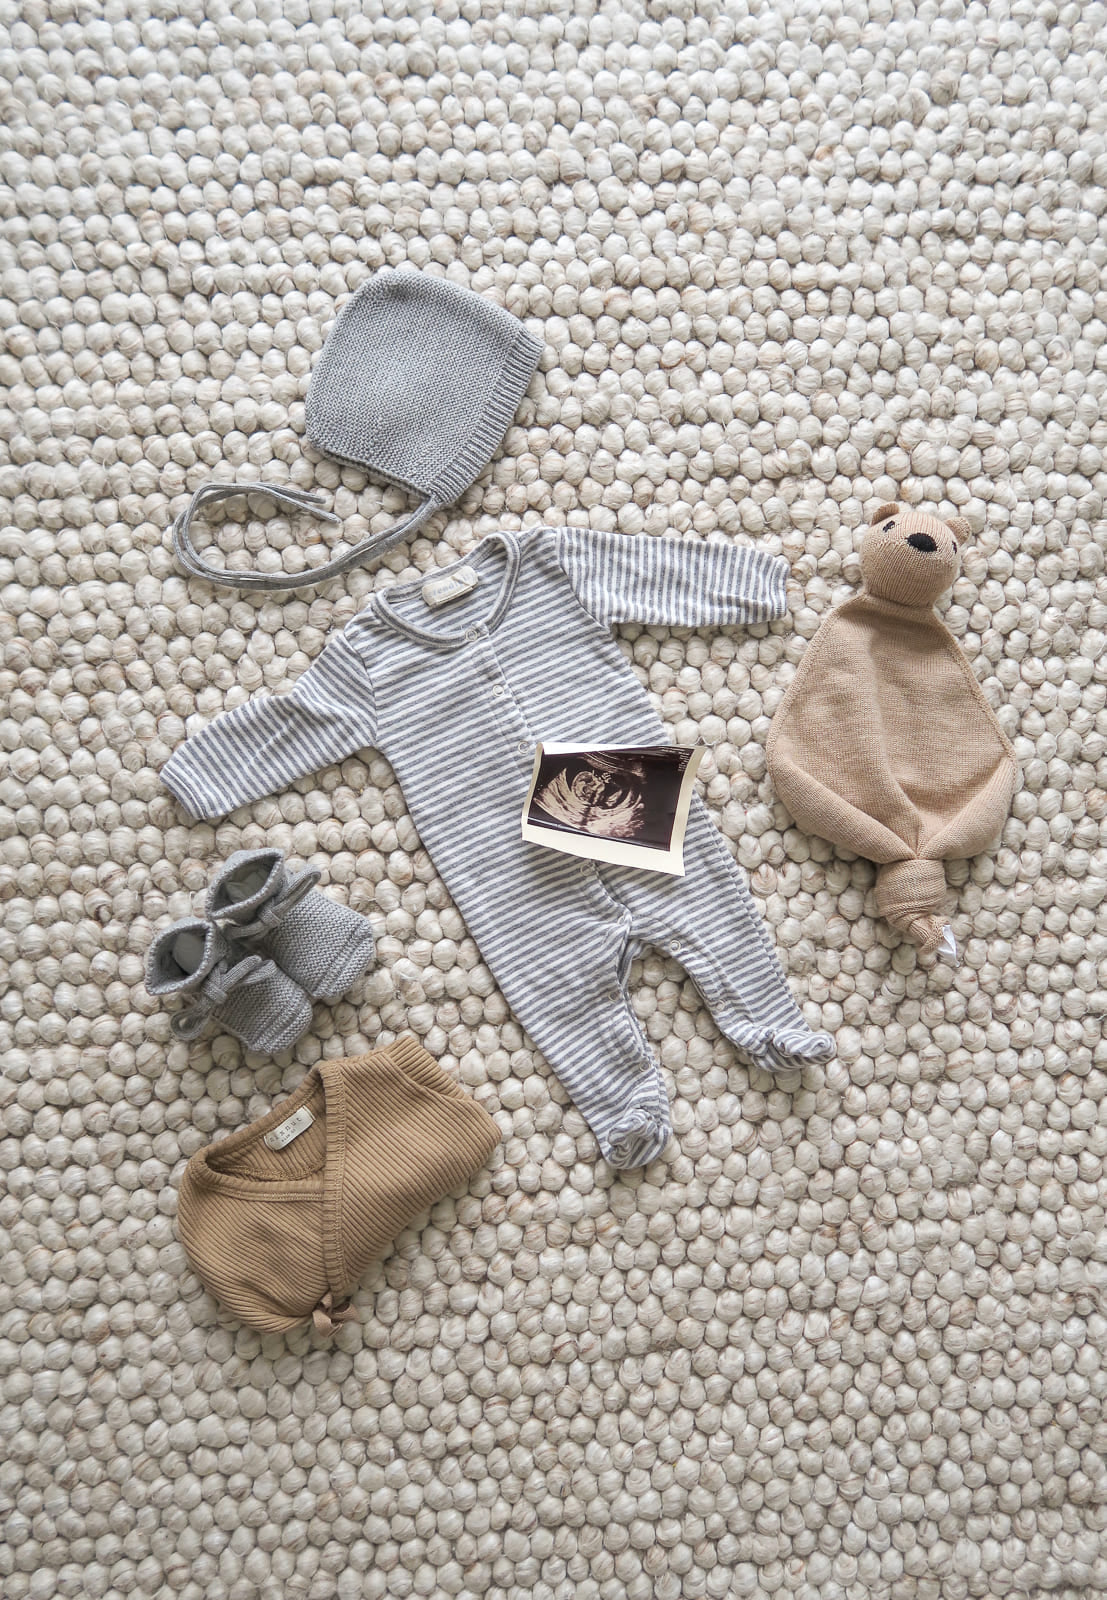 OiOiOi newborn clothes: gray cap, gray and white striped pajamas, gray shoes, brown bodysuit from OiOiOi lies on carpet